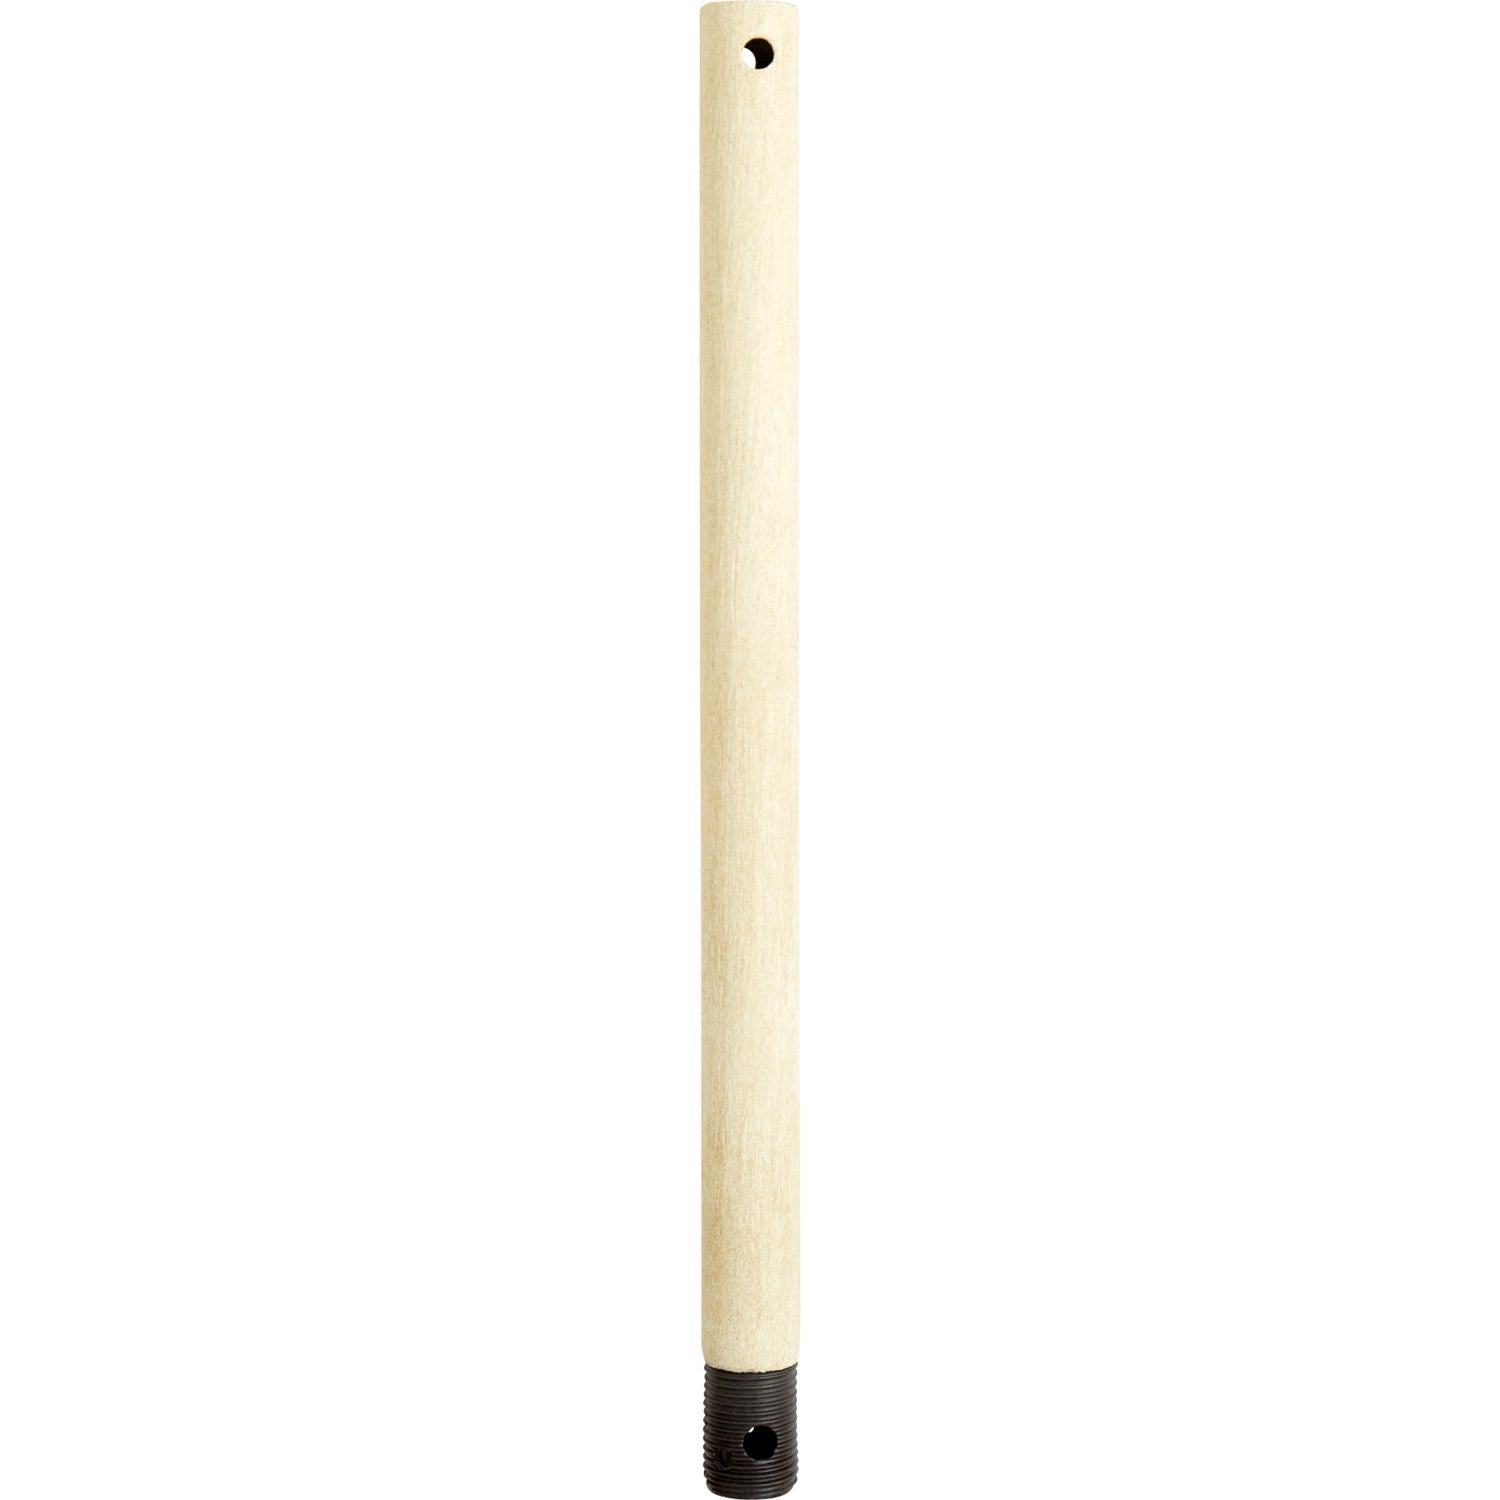 Quorum - 6-1270 - Downrod - 12 in. Downrods - Persian White